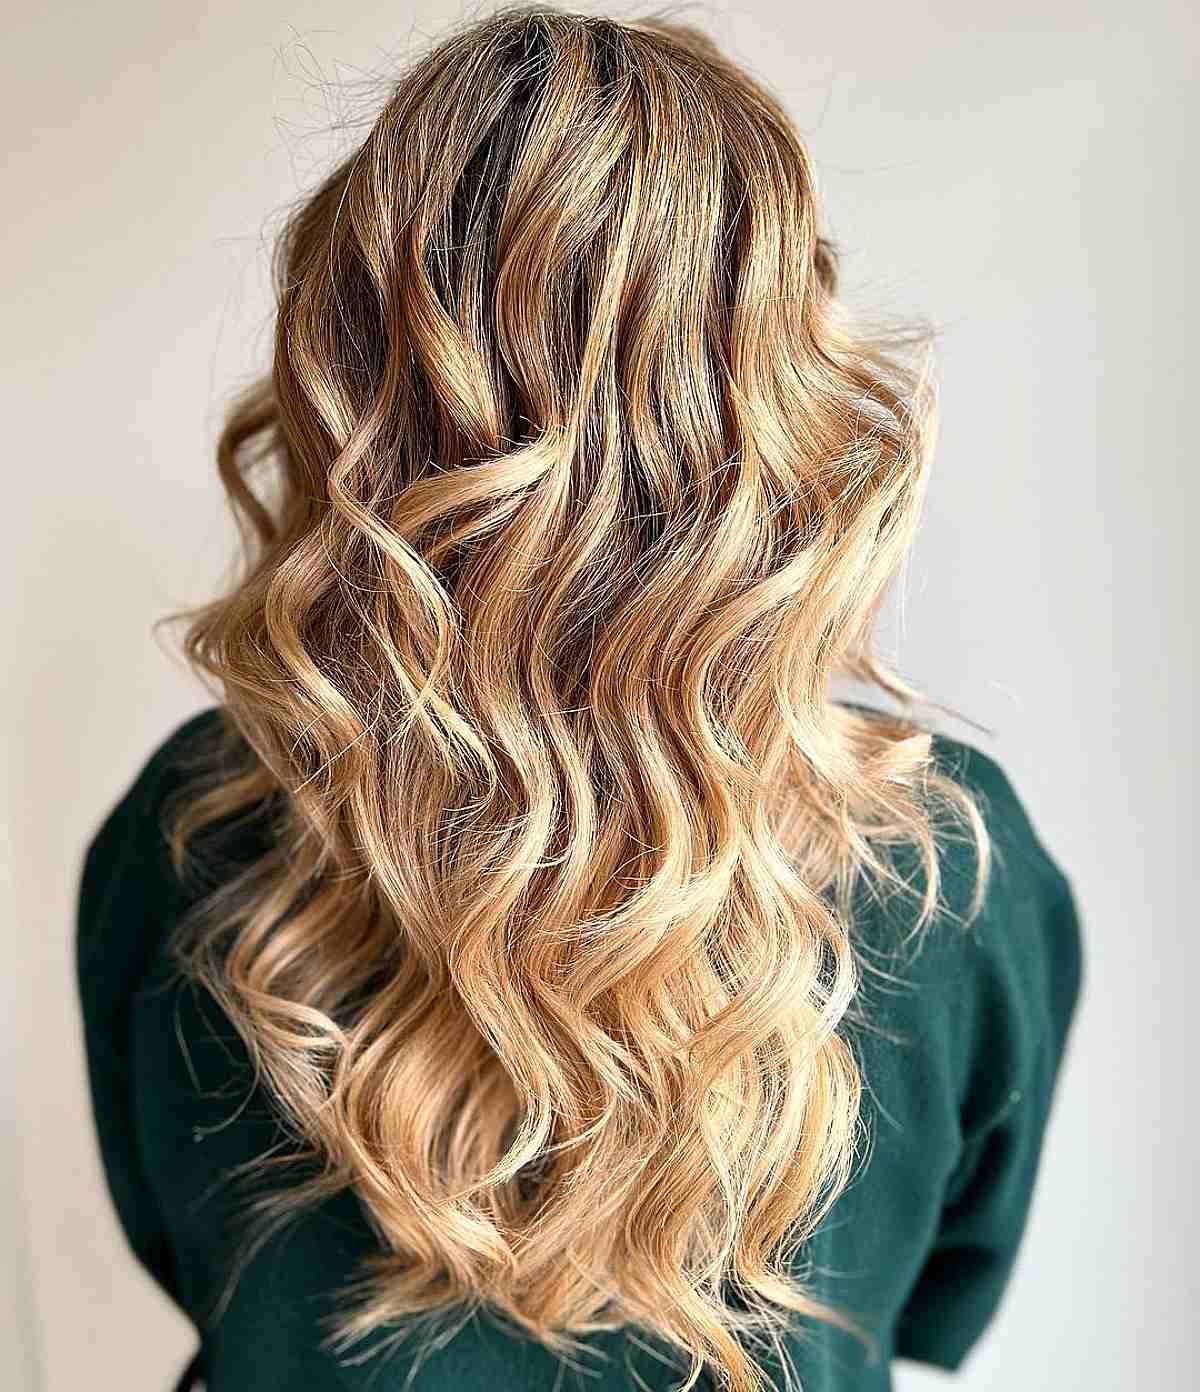 25 Stunning Blonde Hair Color Ideas Beautiful For Every Skin Tone - 209